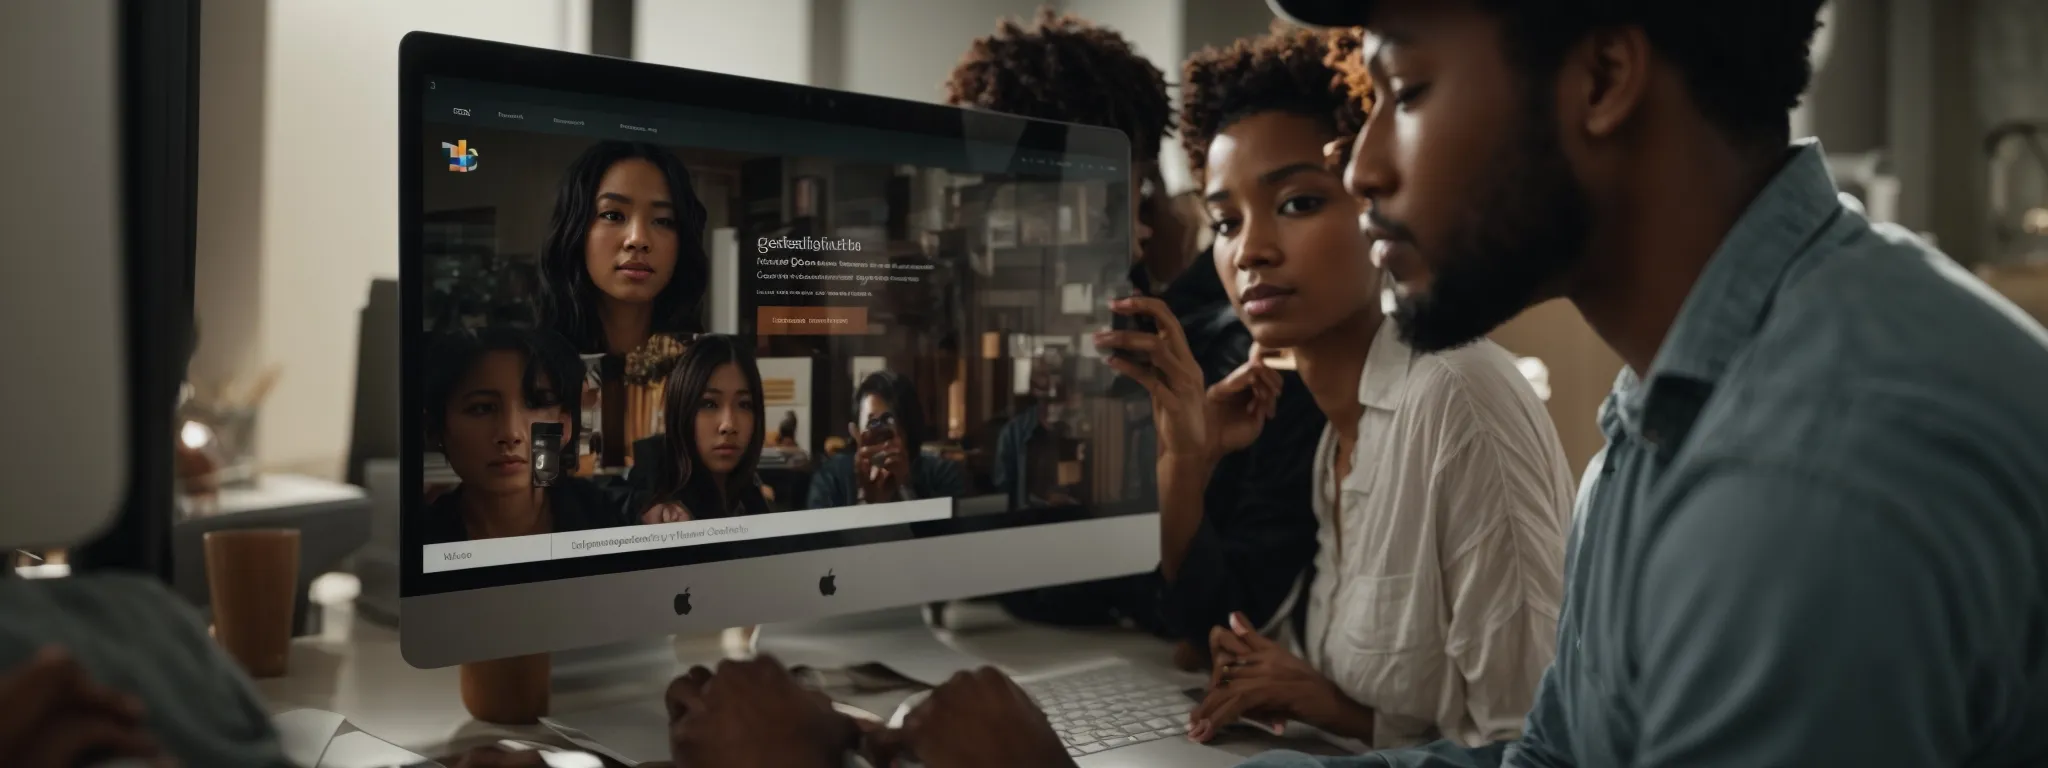 a diverse group of individuals gather around a computer screen, exhibiting satisfaction and surprise as their website ranks higher on a search engine results page.